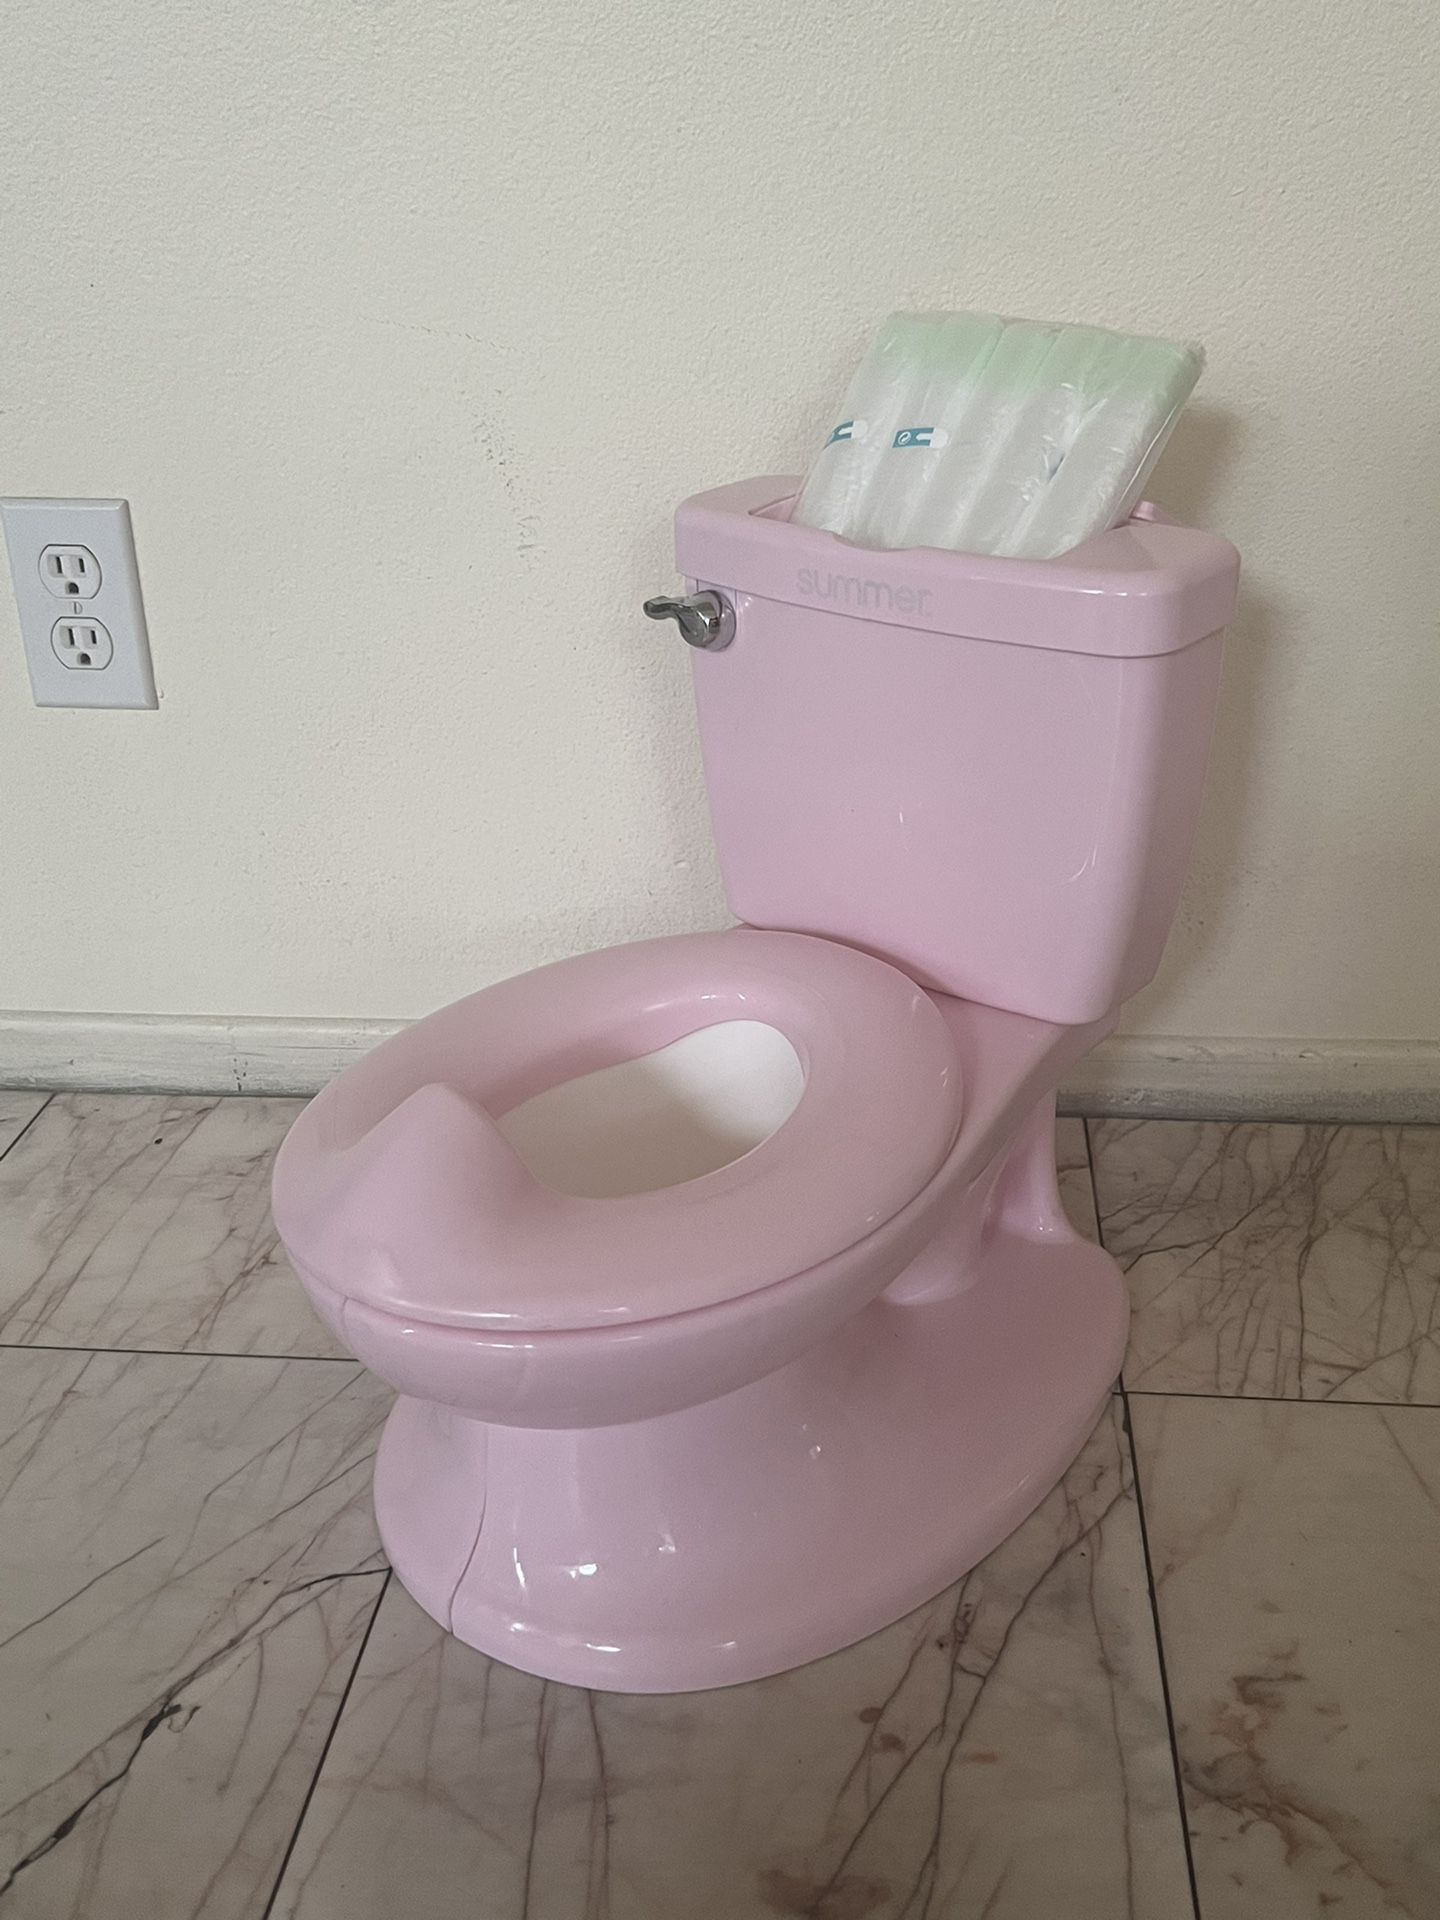 Summer Infant My-Size Potty Training Toilet In Pink 